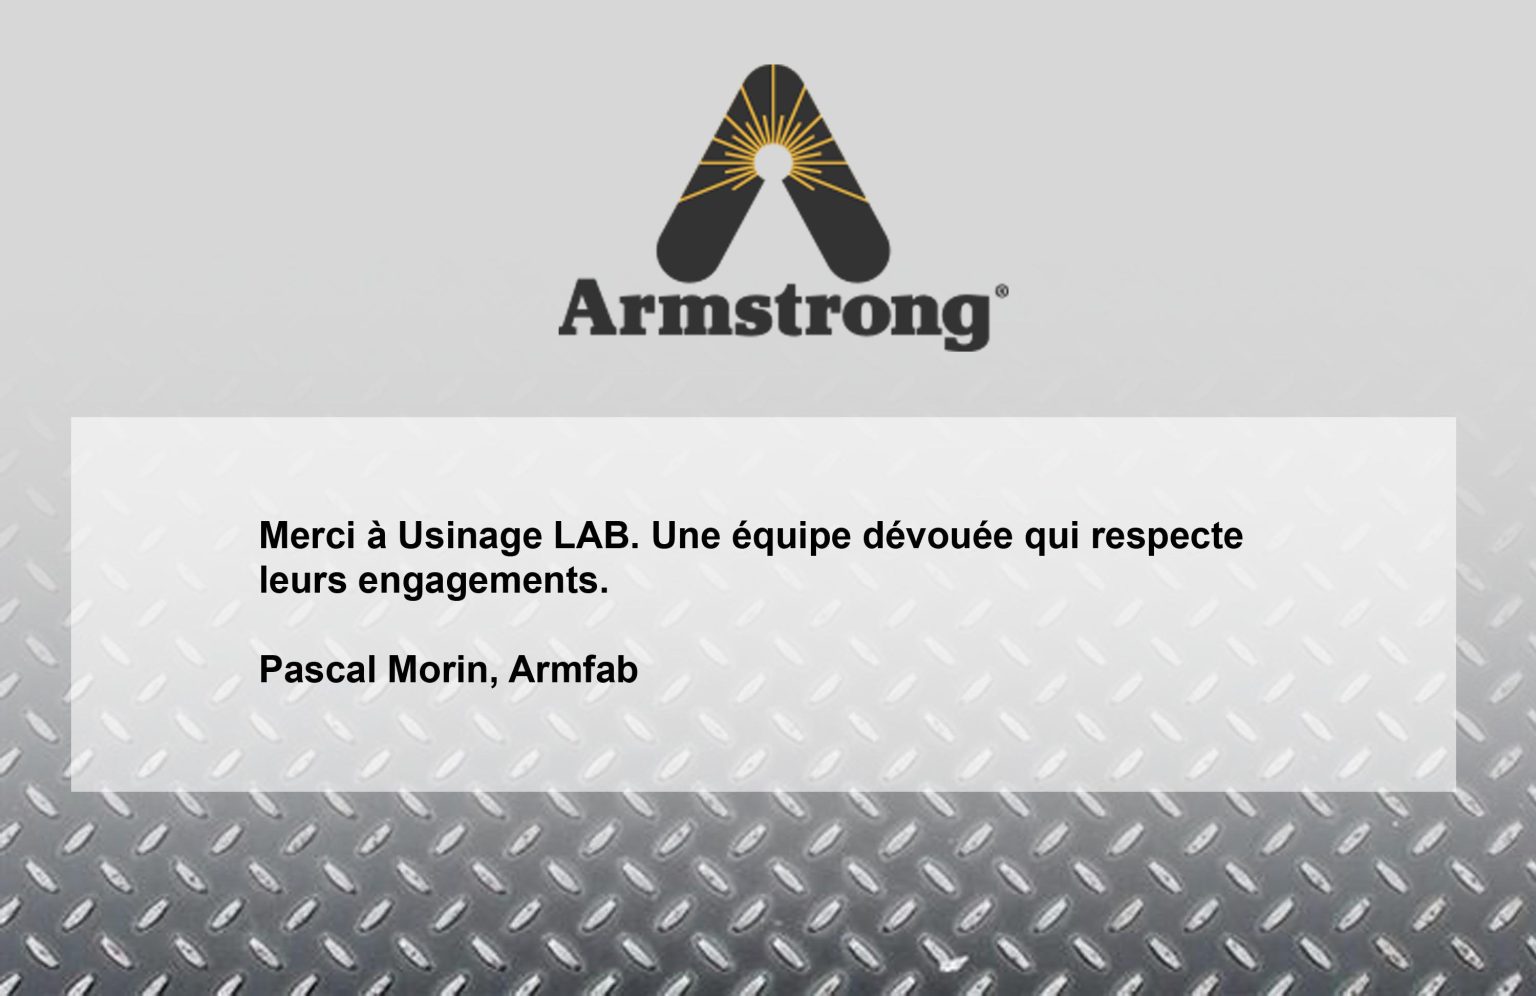 Armstrong testy